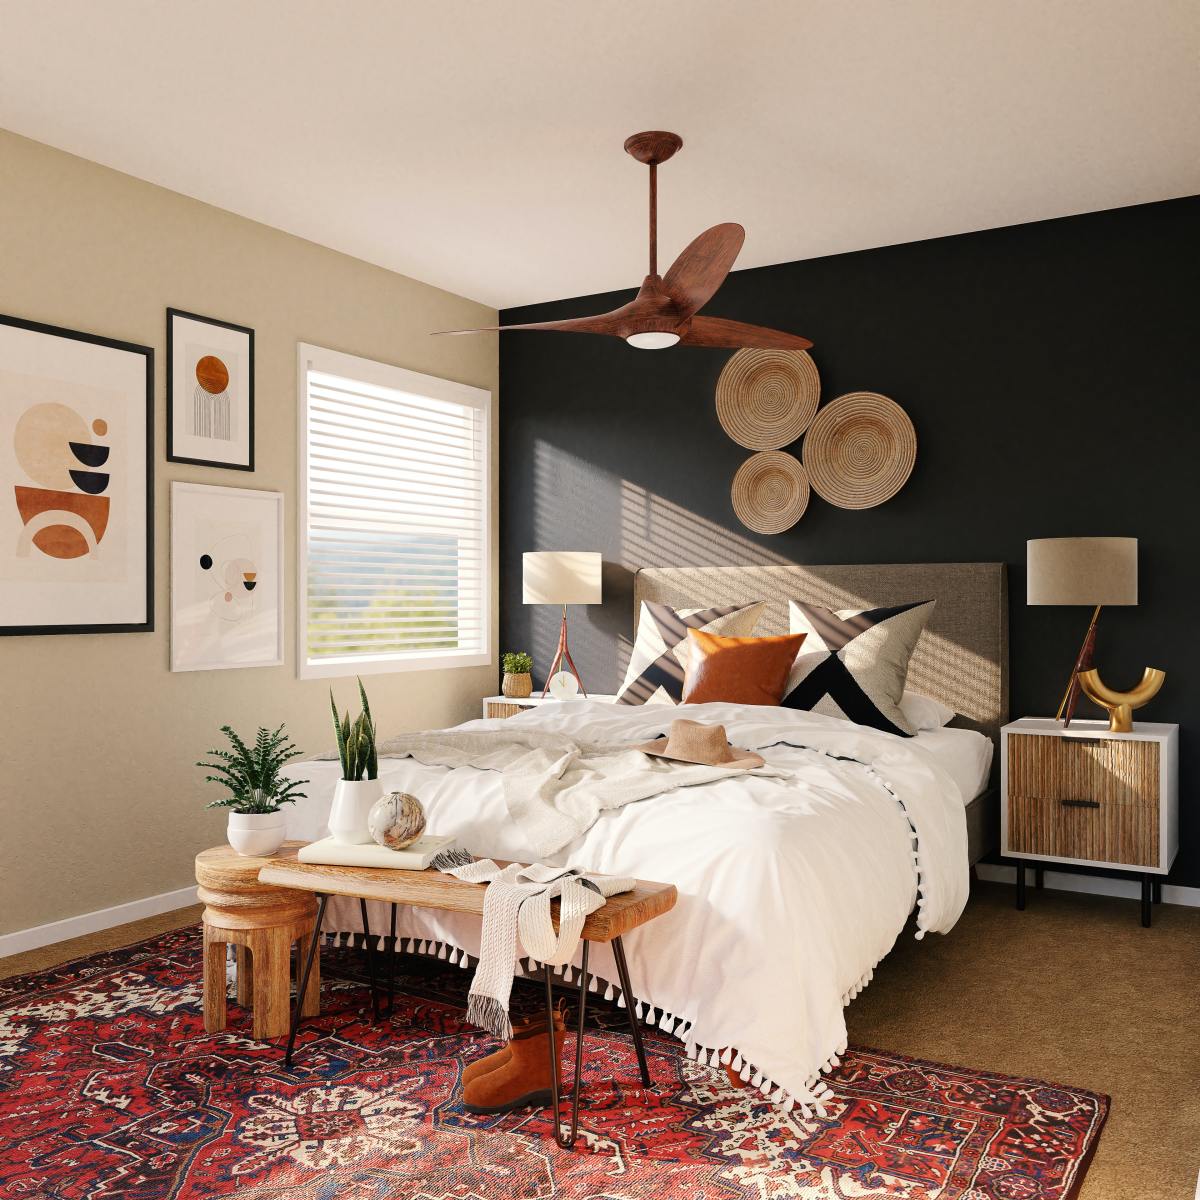 An earth-based bedroom harmonizes different elements. Earthy colors should be in abundance: rusted red, beige, brown, and yellow. A geometric rug goes well in this room.